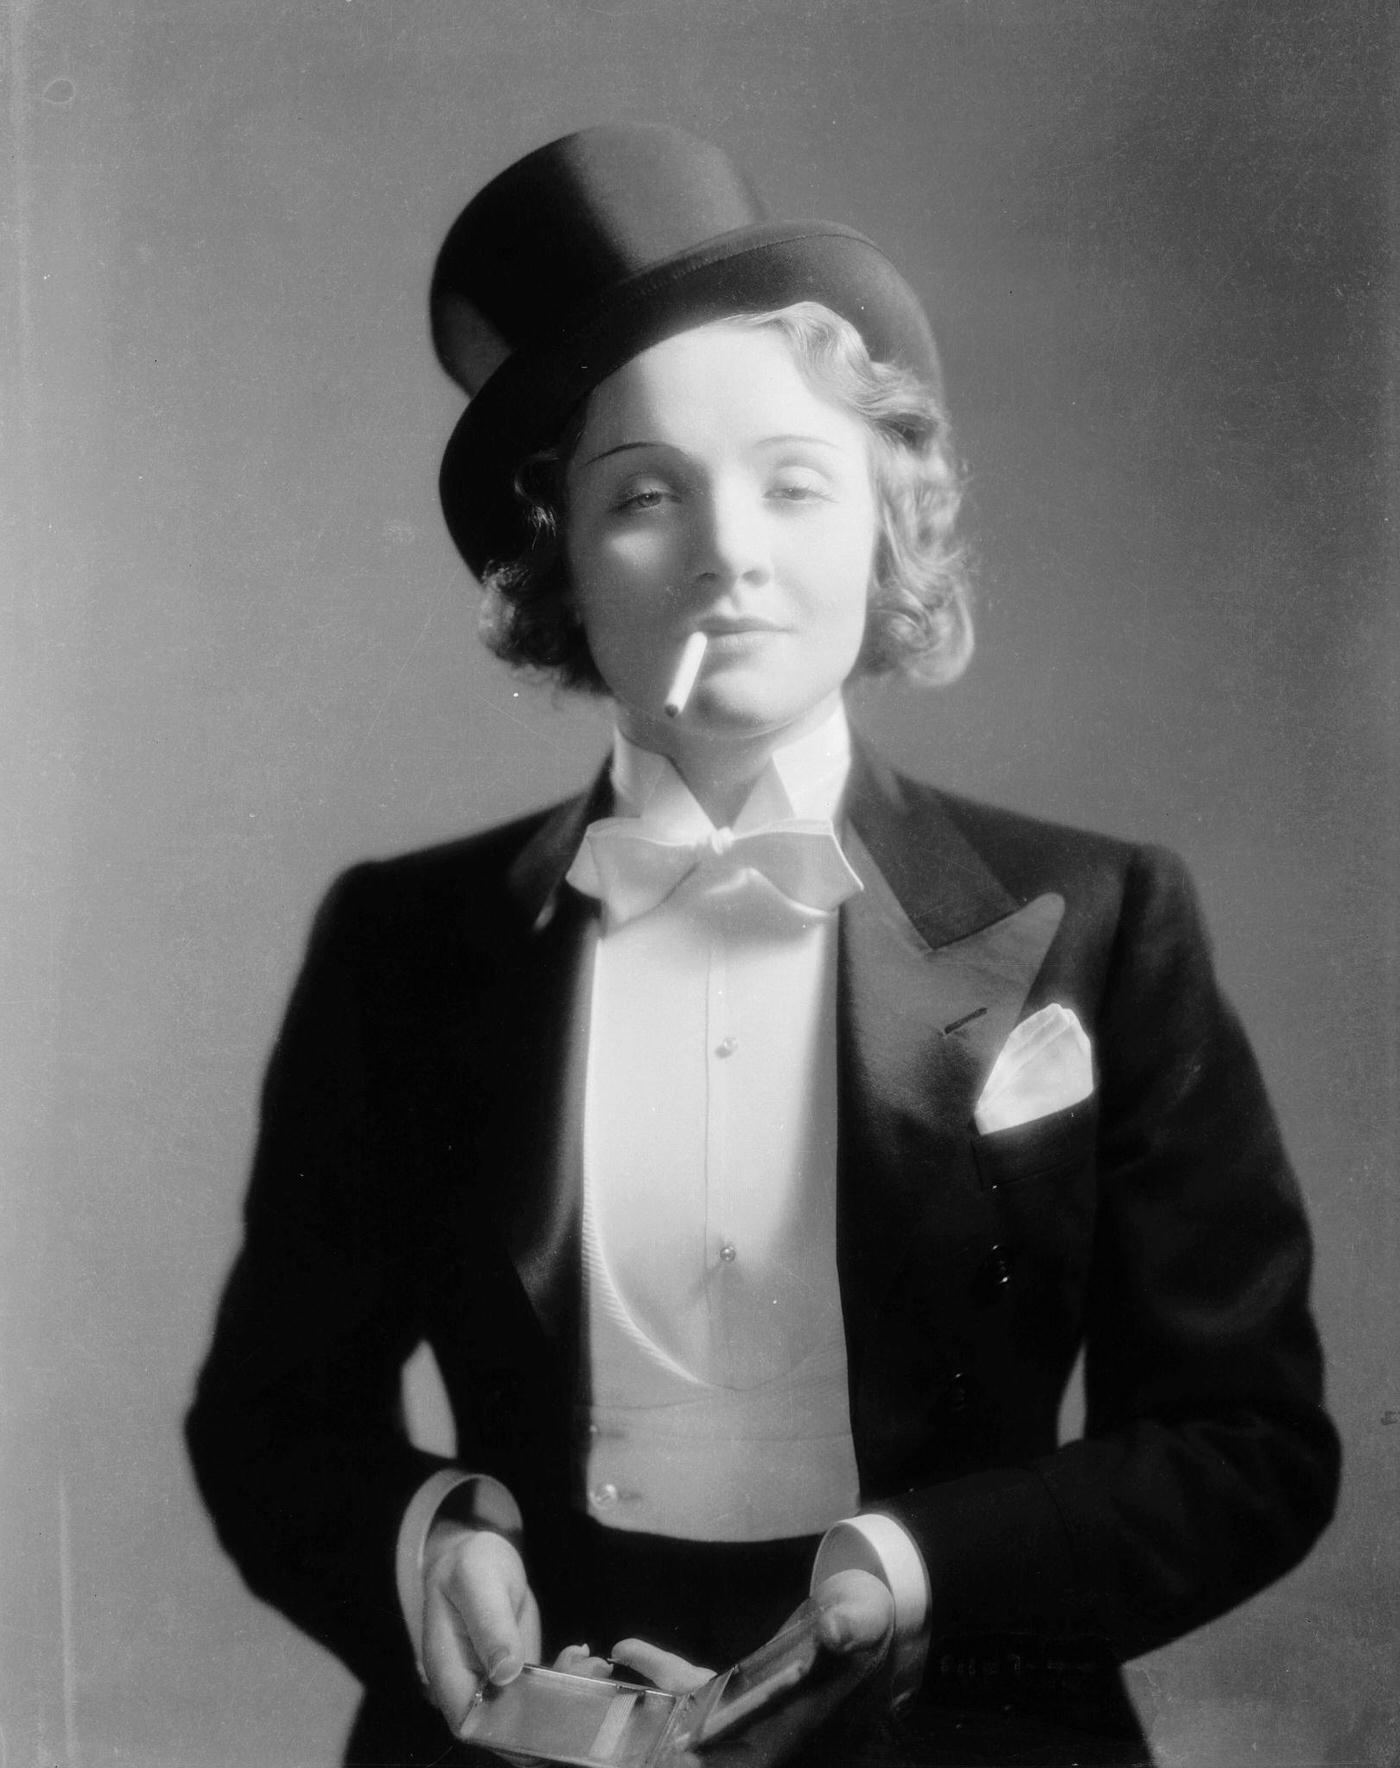 Marlene Dietrich making her Hollywood film debut as the tuxedo-clad Amy Jolly in the film 'Morocco', 1930